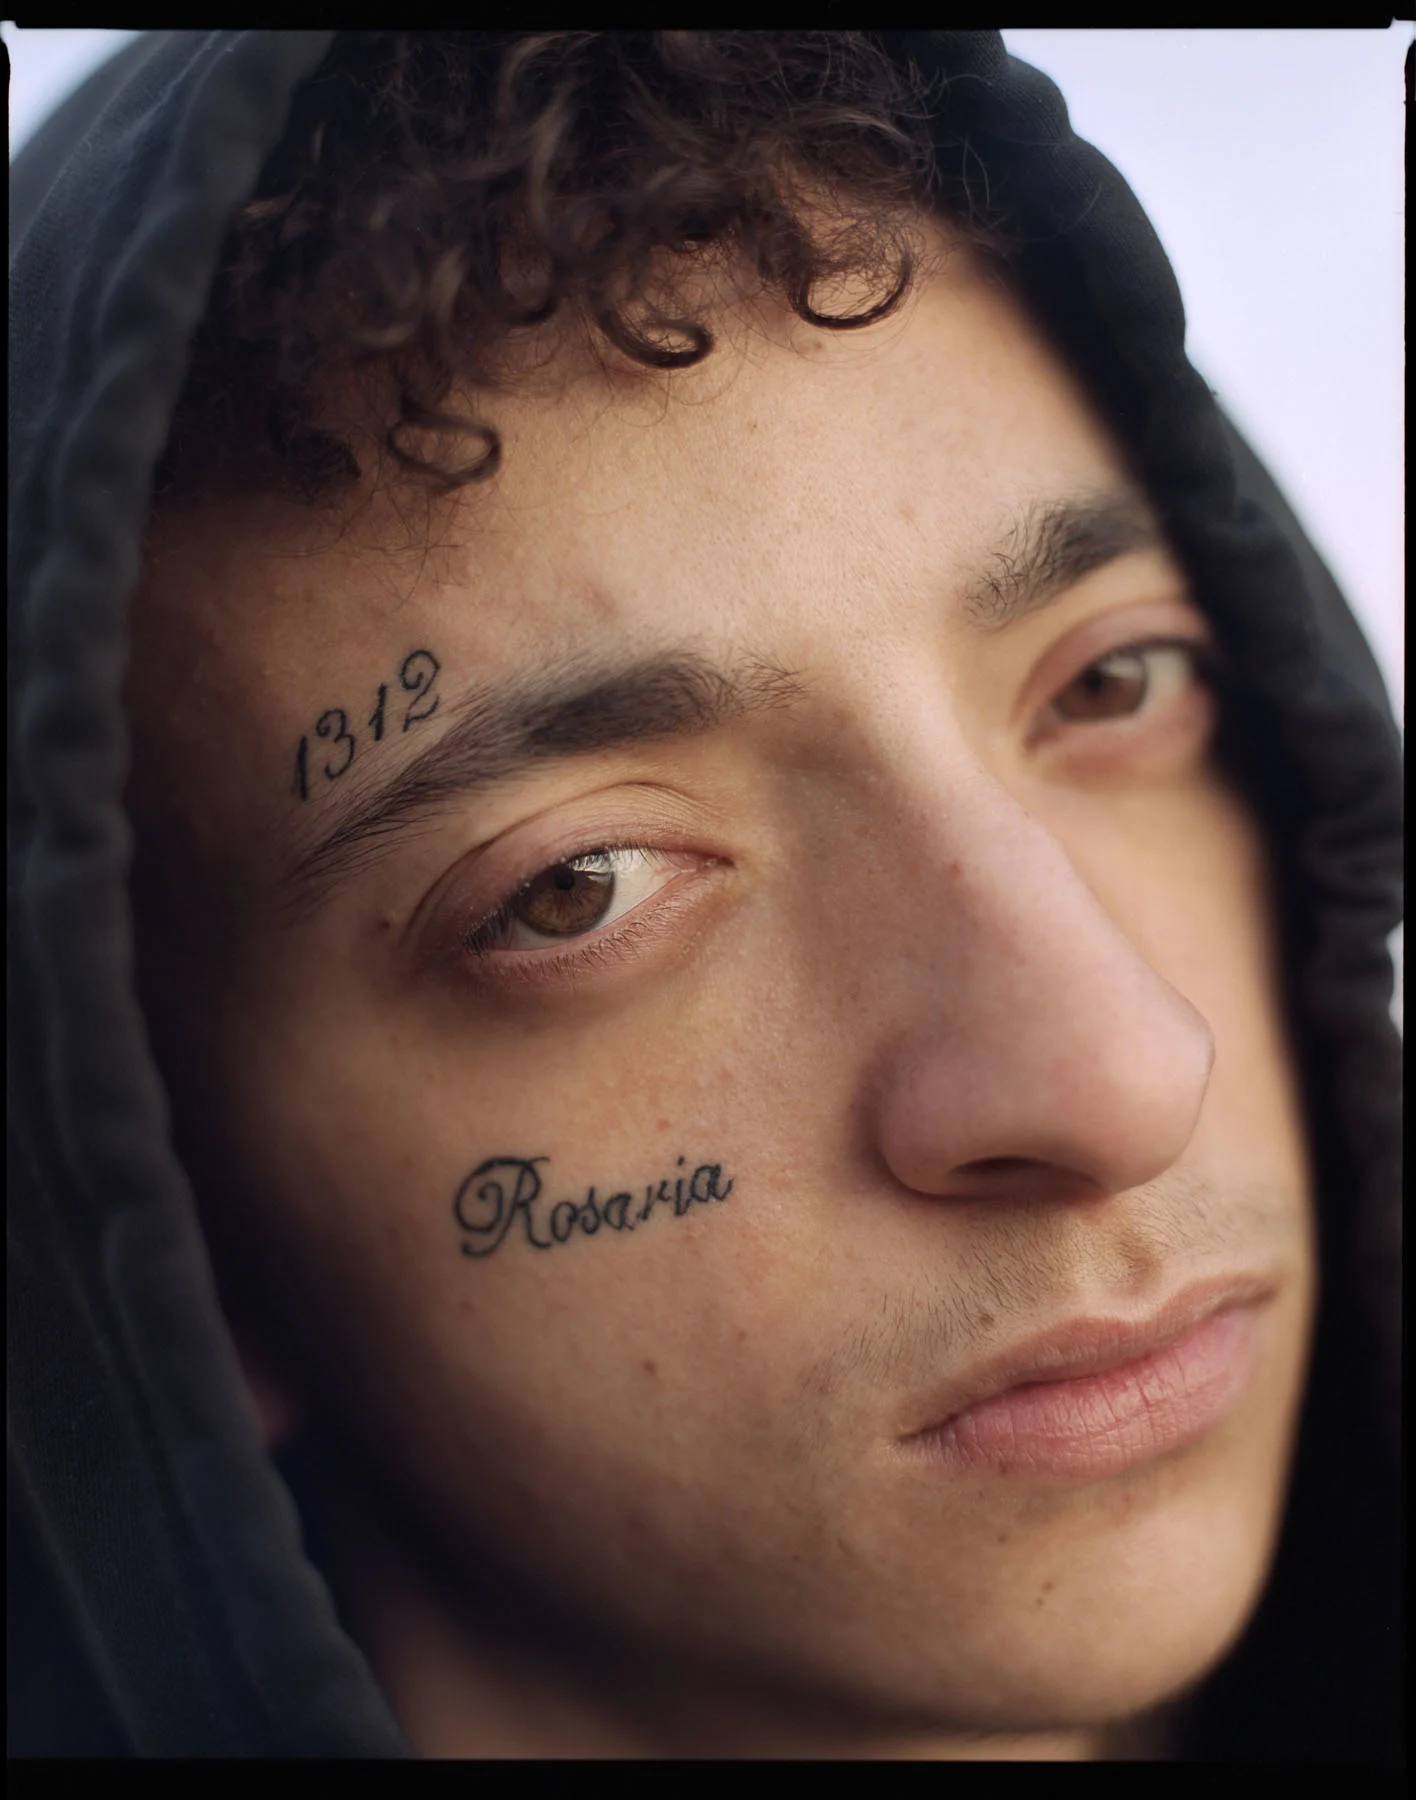 A photo of a teenage boy staring at the camera with his hood up, two tattoos around his right eye